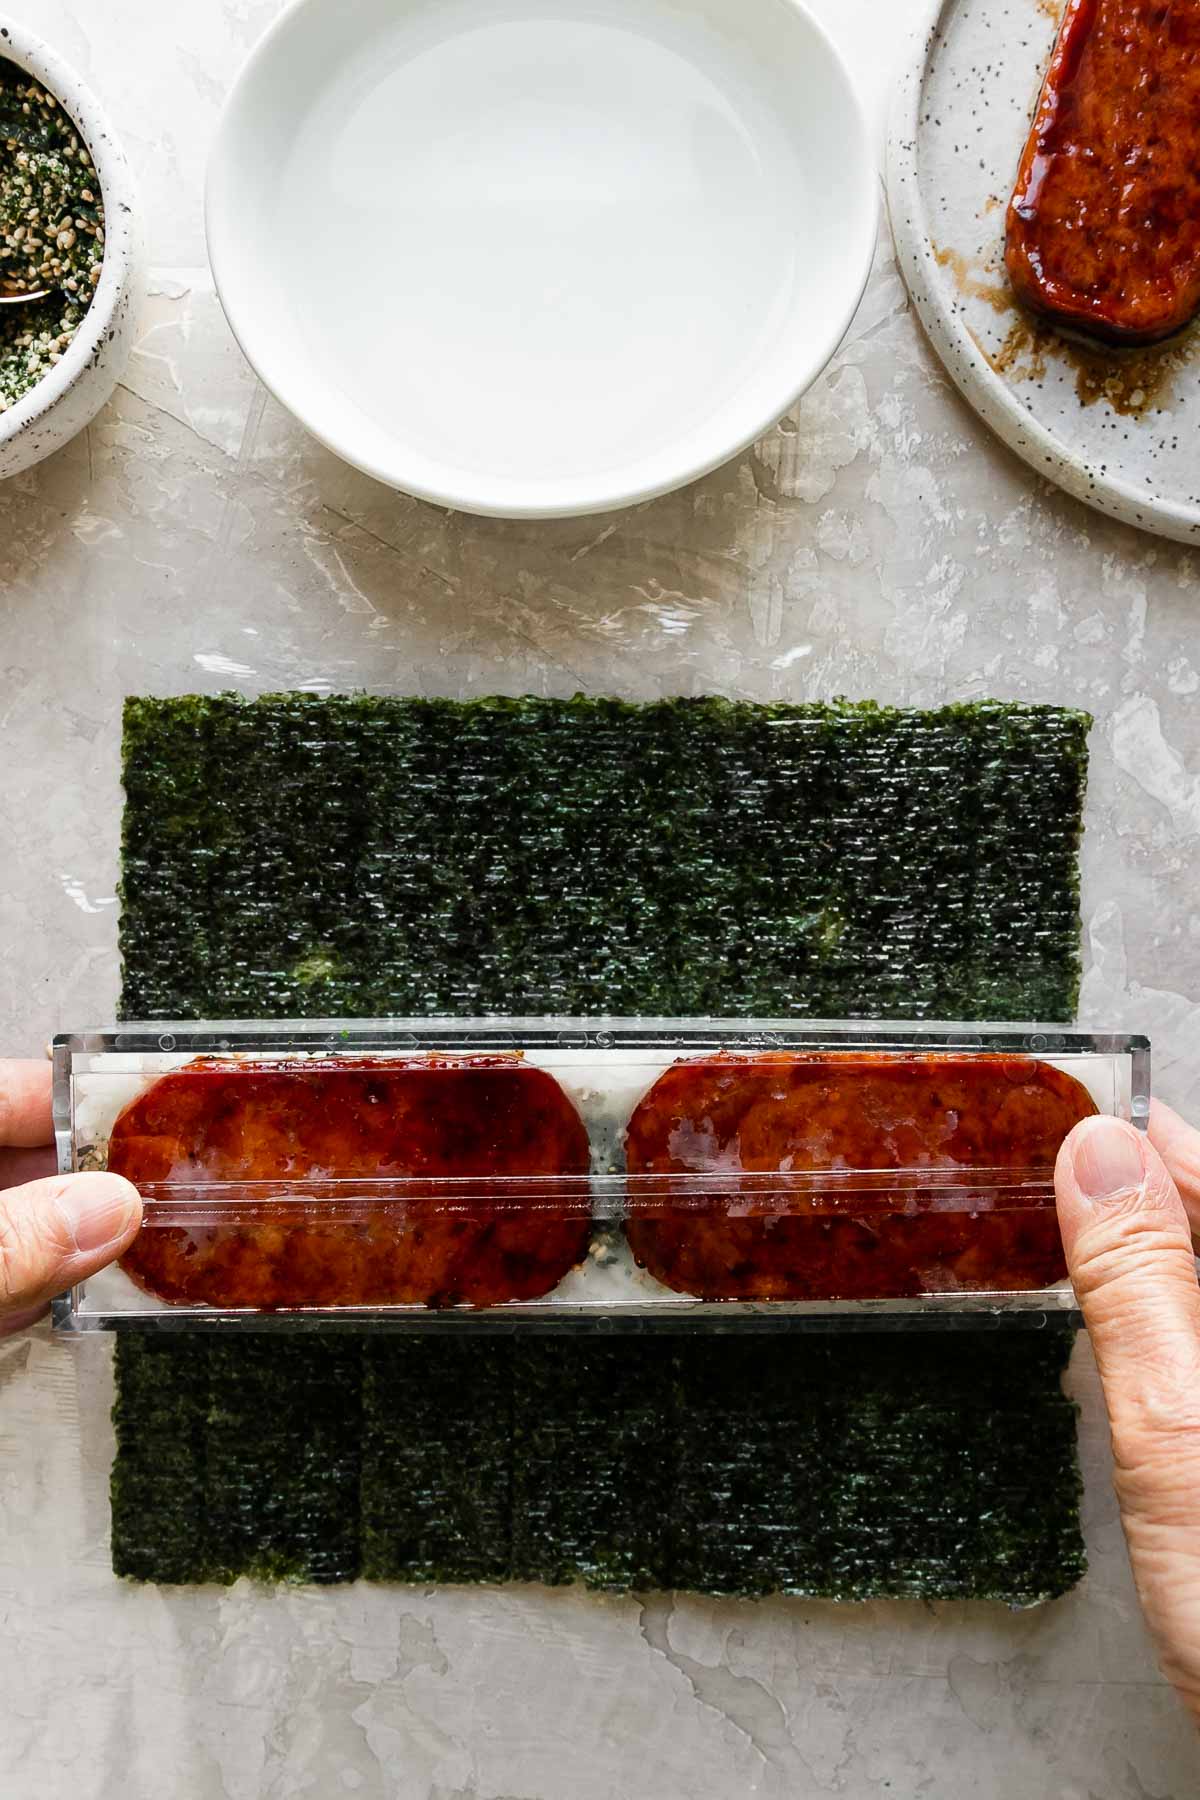 Best-Ever Spam Musubi (Hawaiian Family Recipe, Step-by-Step!)